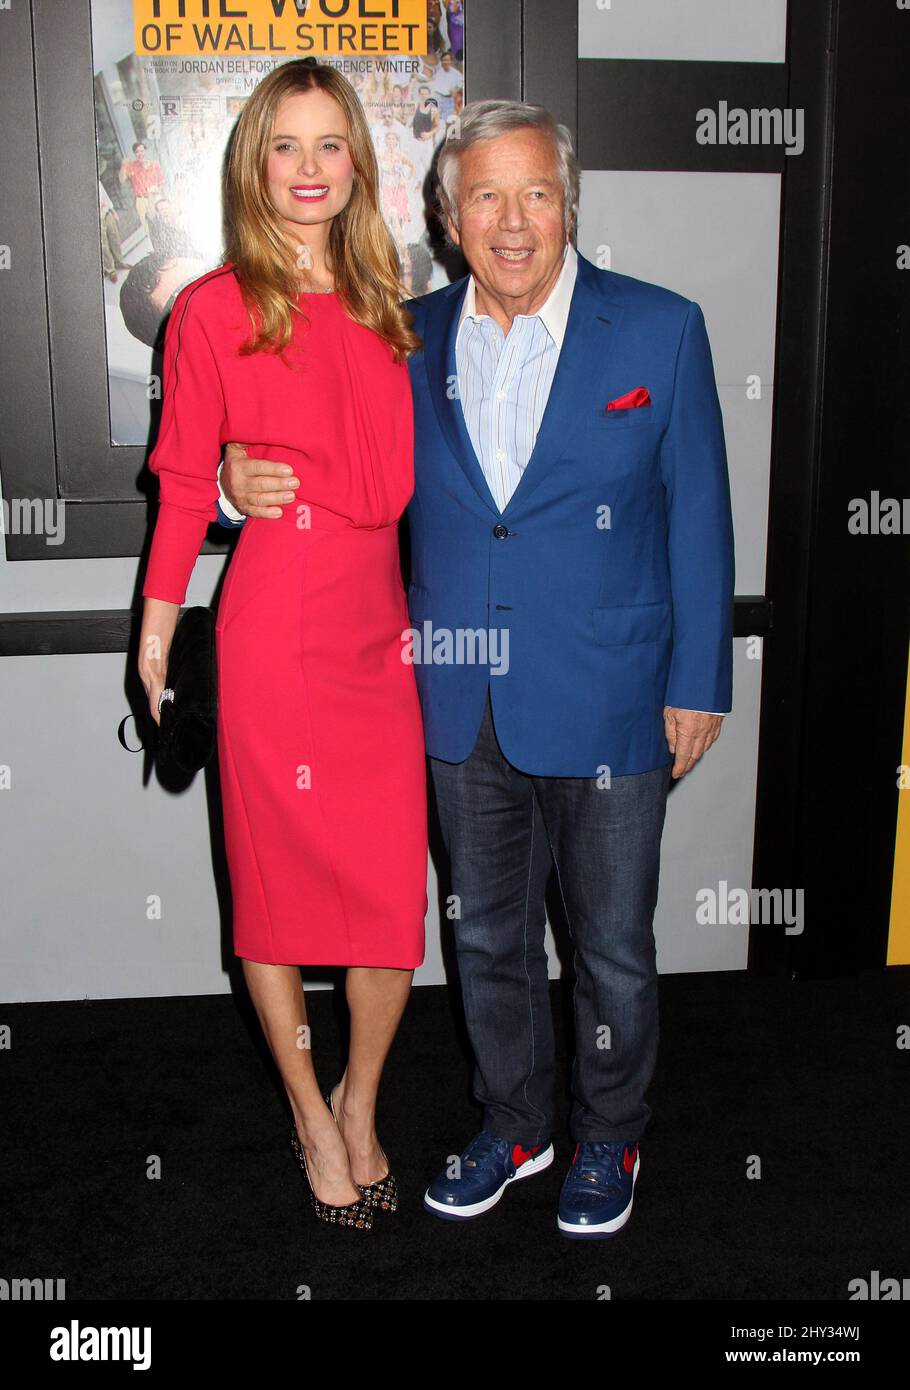 Ricki Noel Lander and Bob Kraft attending the premiere of "The Wolf of Wall Street" in New York. Stock Photo